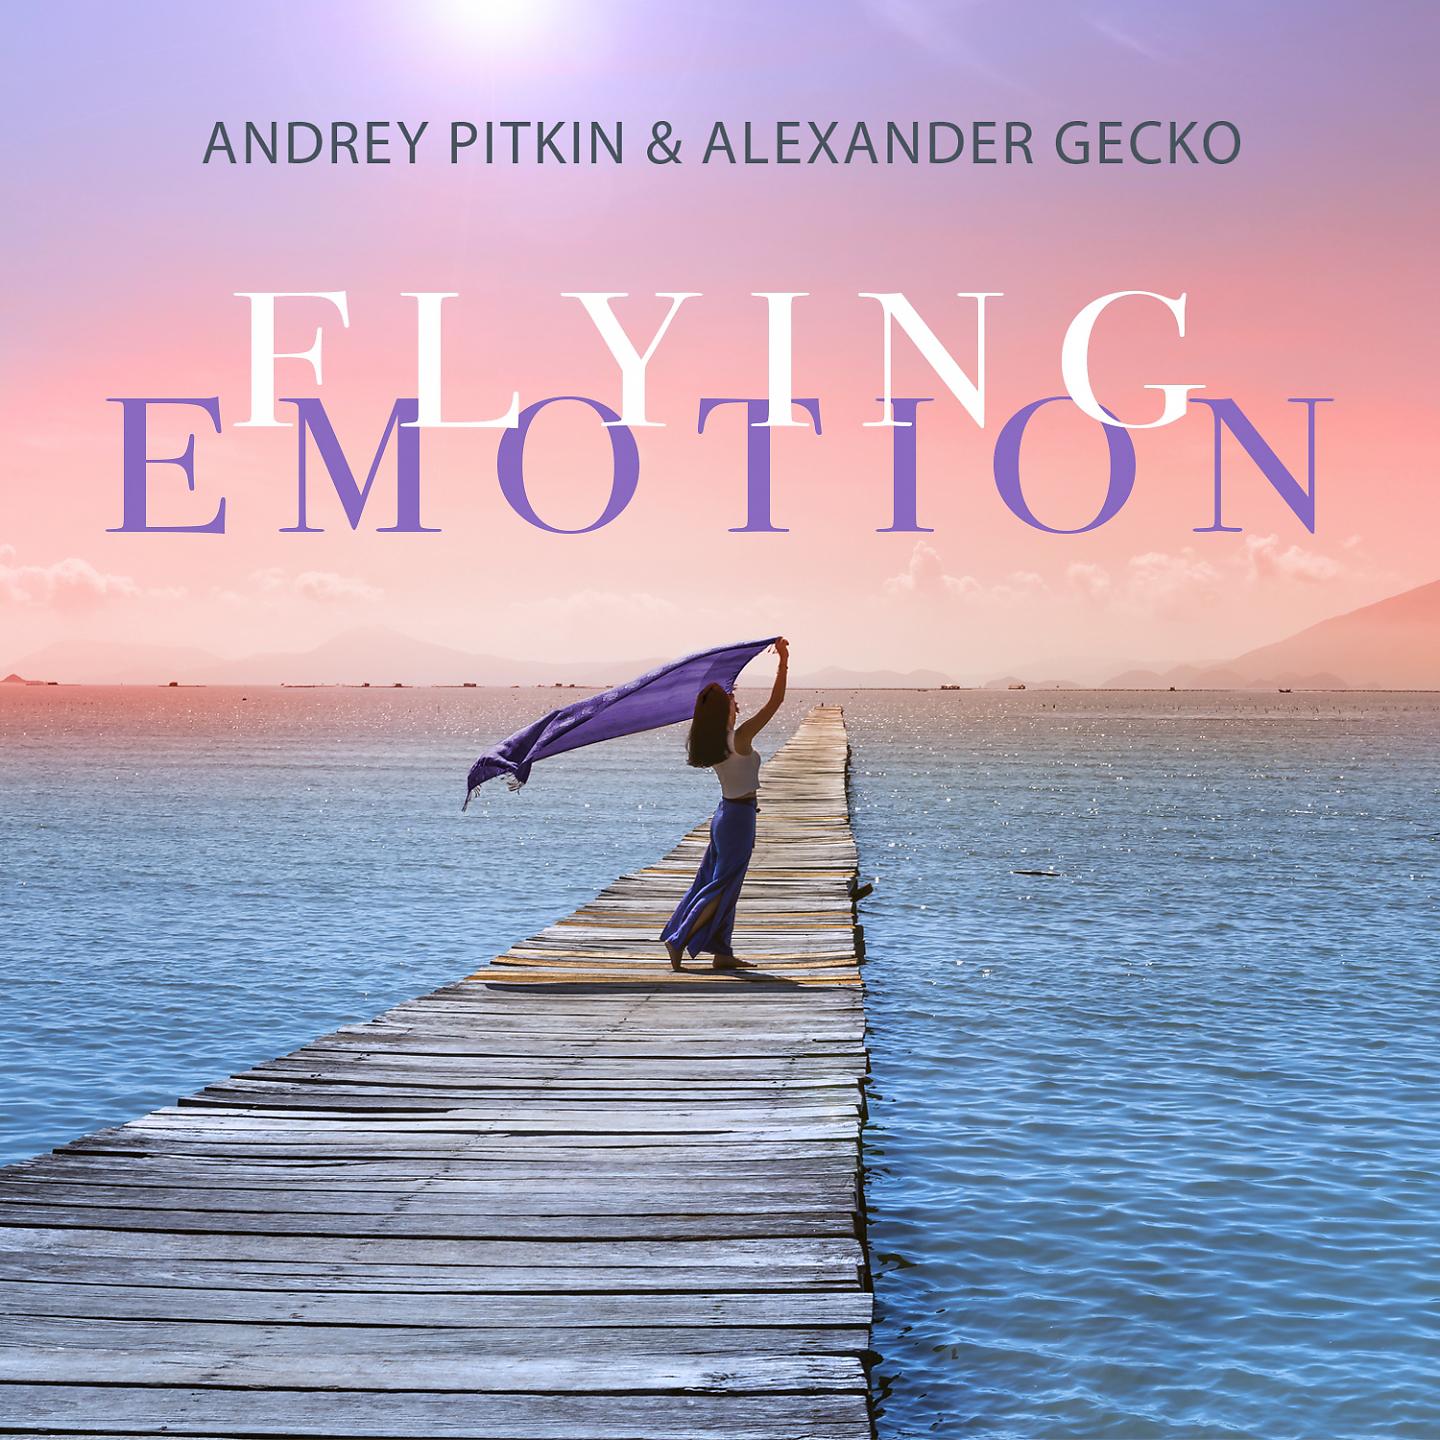 Andrey mix. Andrey Pitkin, Alexander Gecko. Andrey Pitkin Alexander Gecko Flying emotion фото с альбома. Gecko Music. Andrey Pitkin - thoughts (Radio Edit).